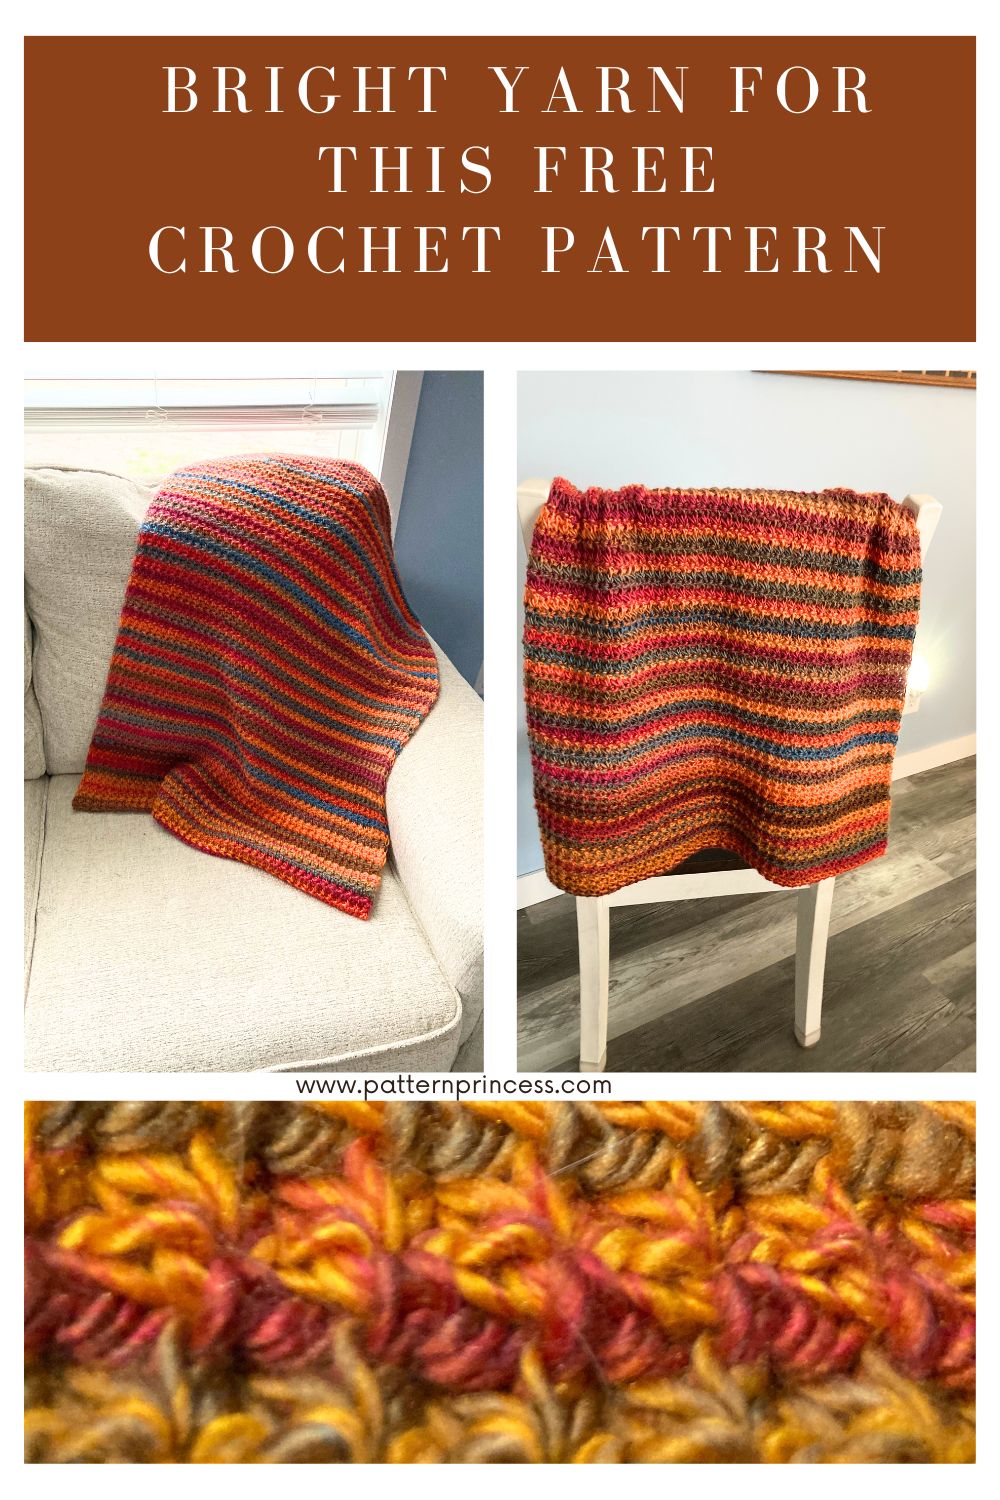 Bright Yarn for this Free Crochet Pattern